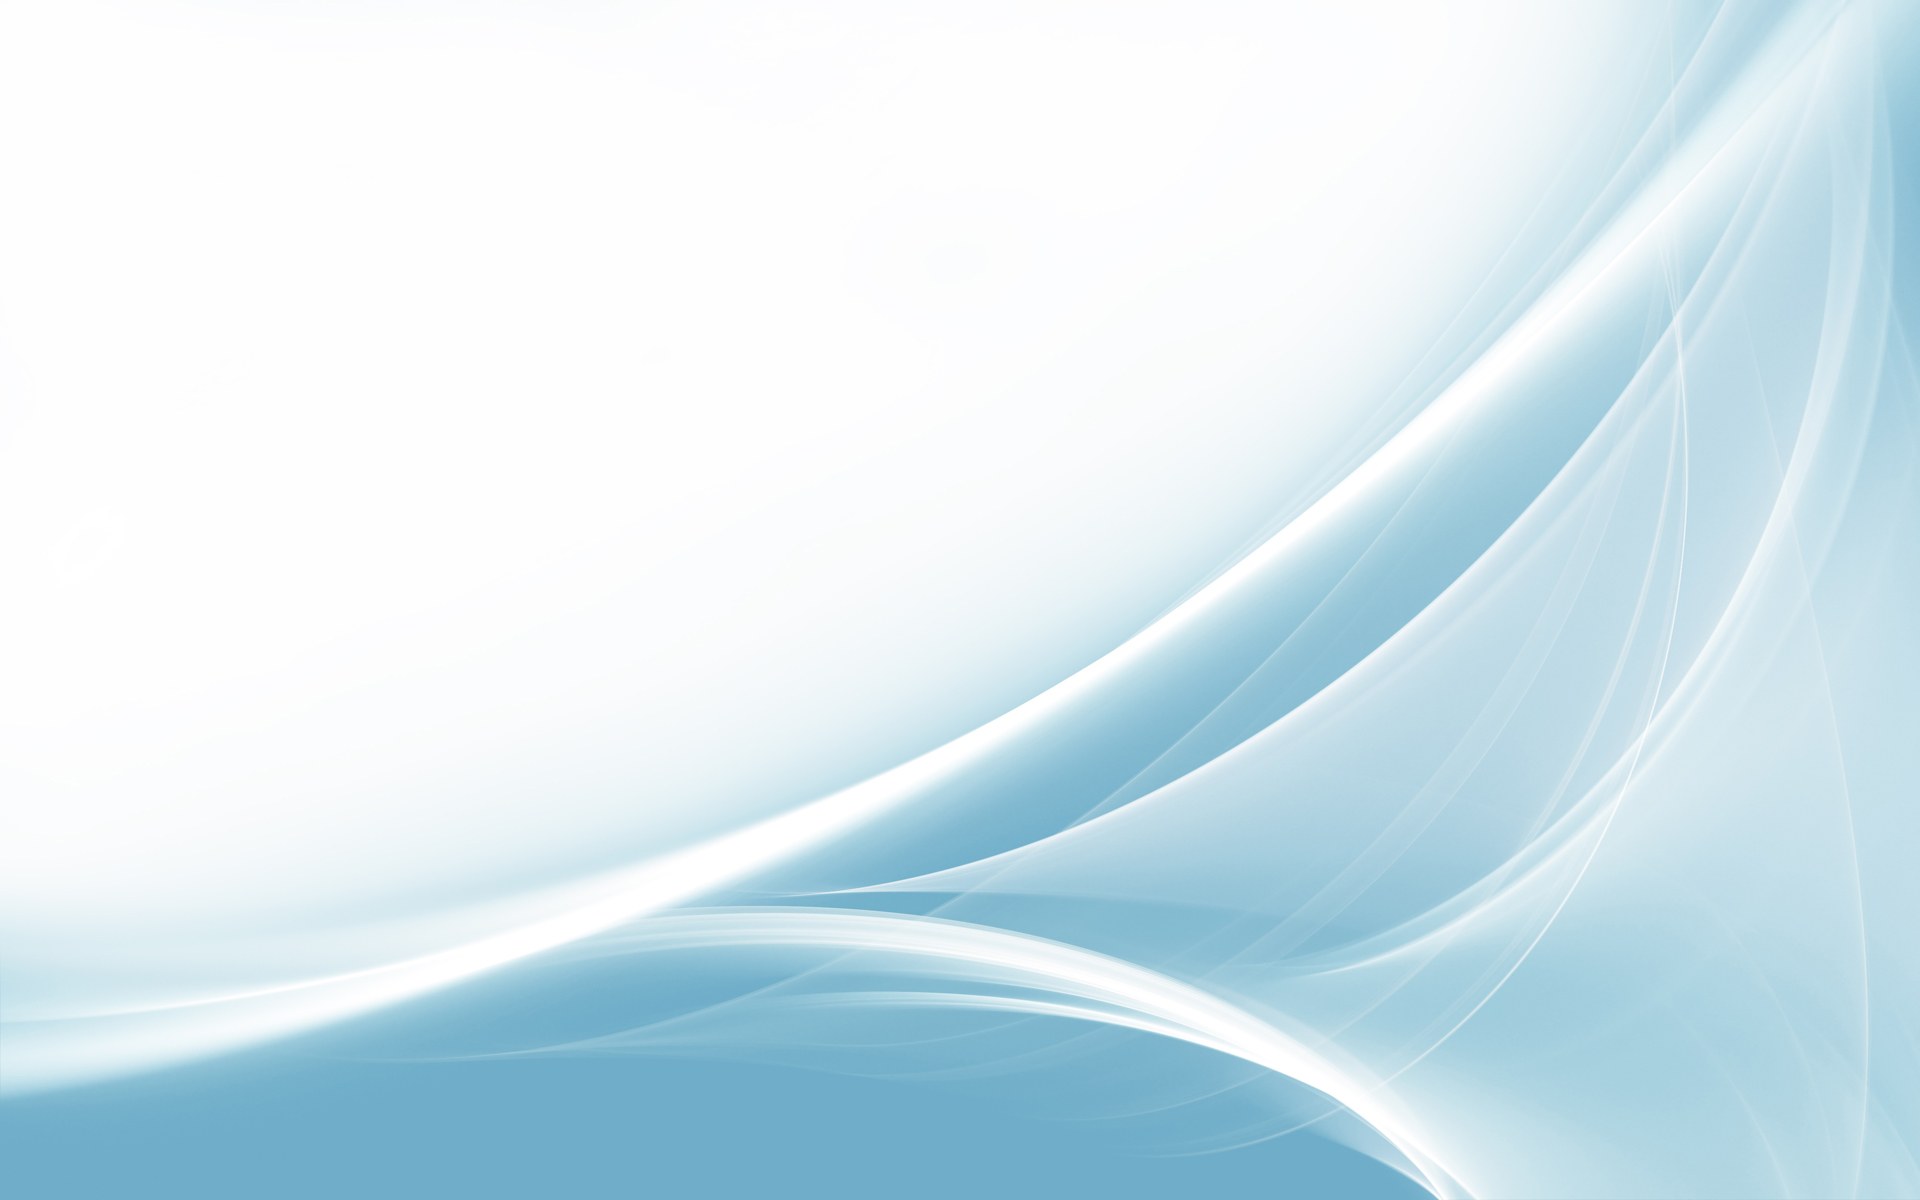 Abstract Background Blue HD Wallpaper In Imageci